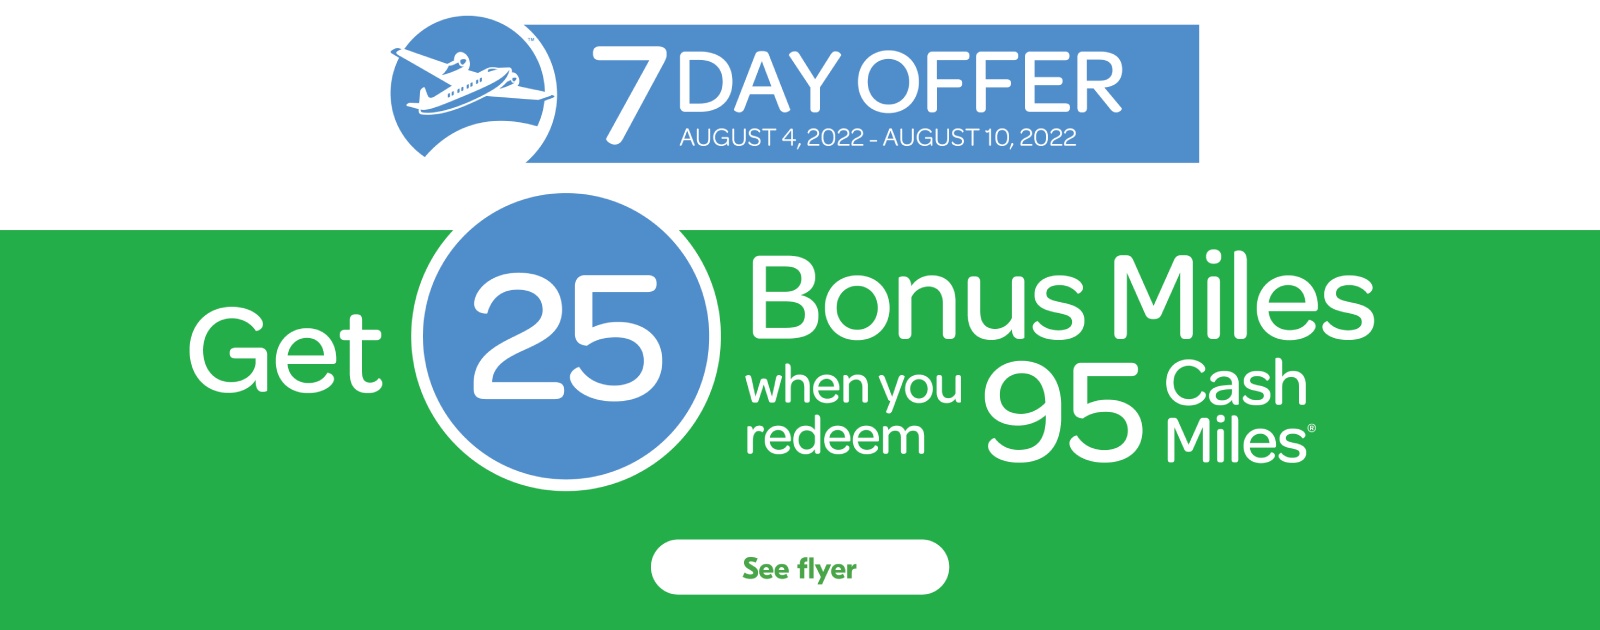 Text Reading '7 Day offer from August 4, 2022 to August 10, 2022. Get 25 Bonus Miles when you redeem 95 Cash Miles. 'See flyer' button for more information'.